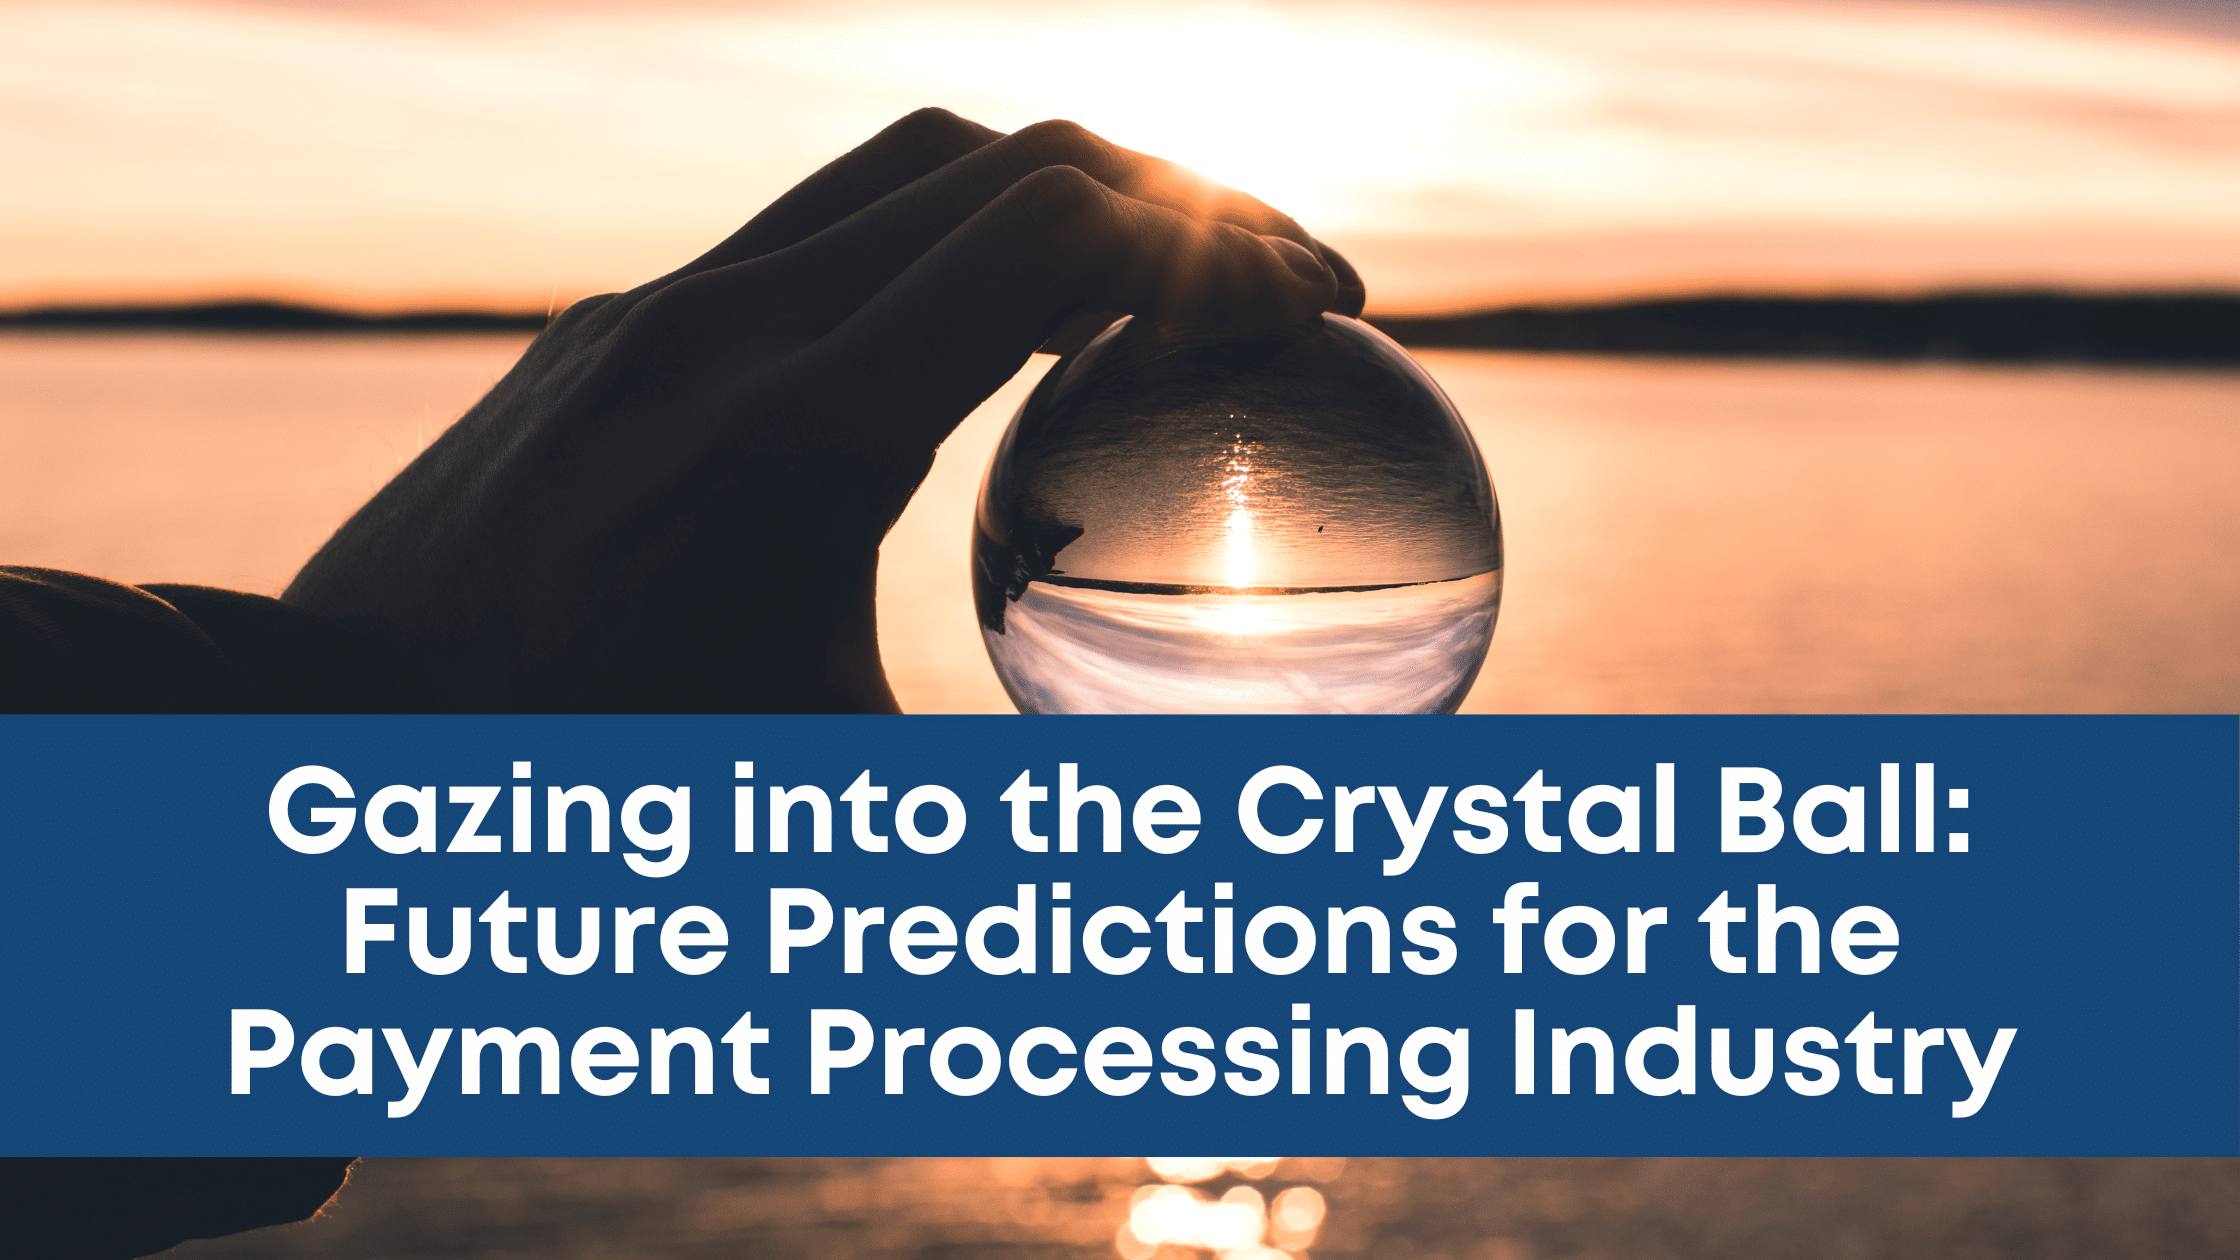 Gazing into the Crystal Ball: Future Predictions for the Payment Processing Industry